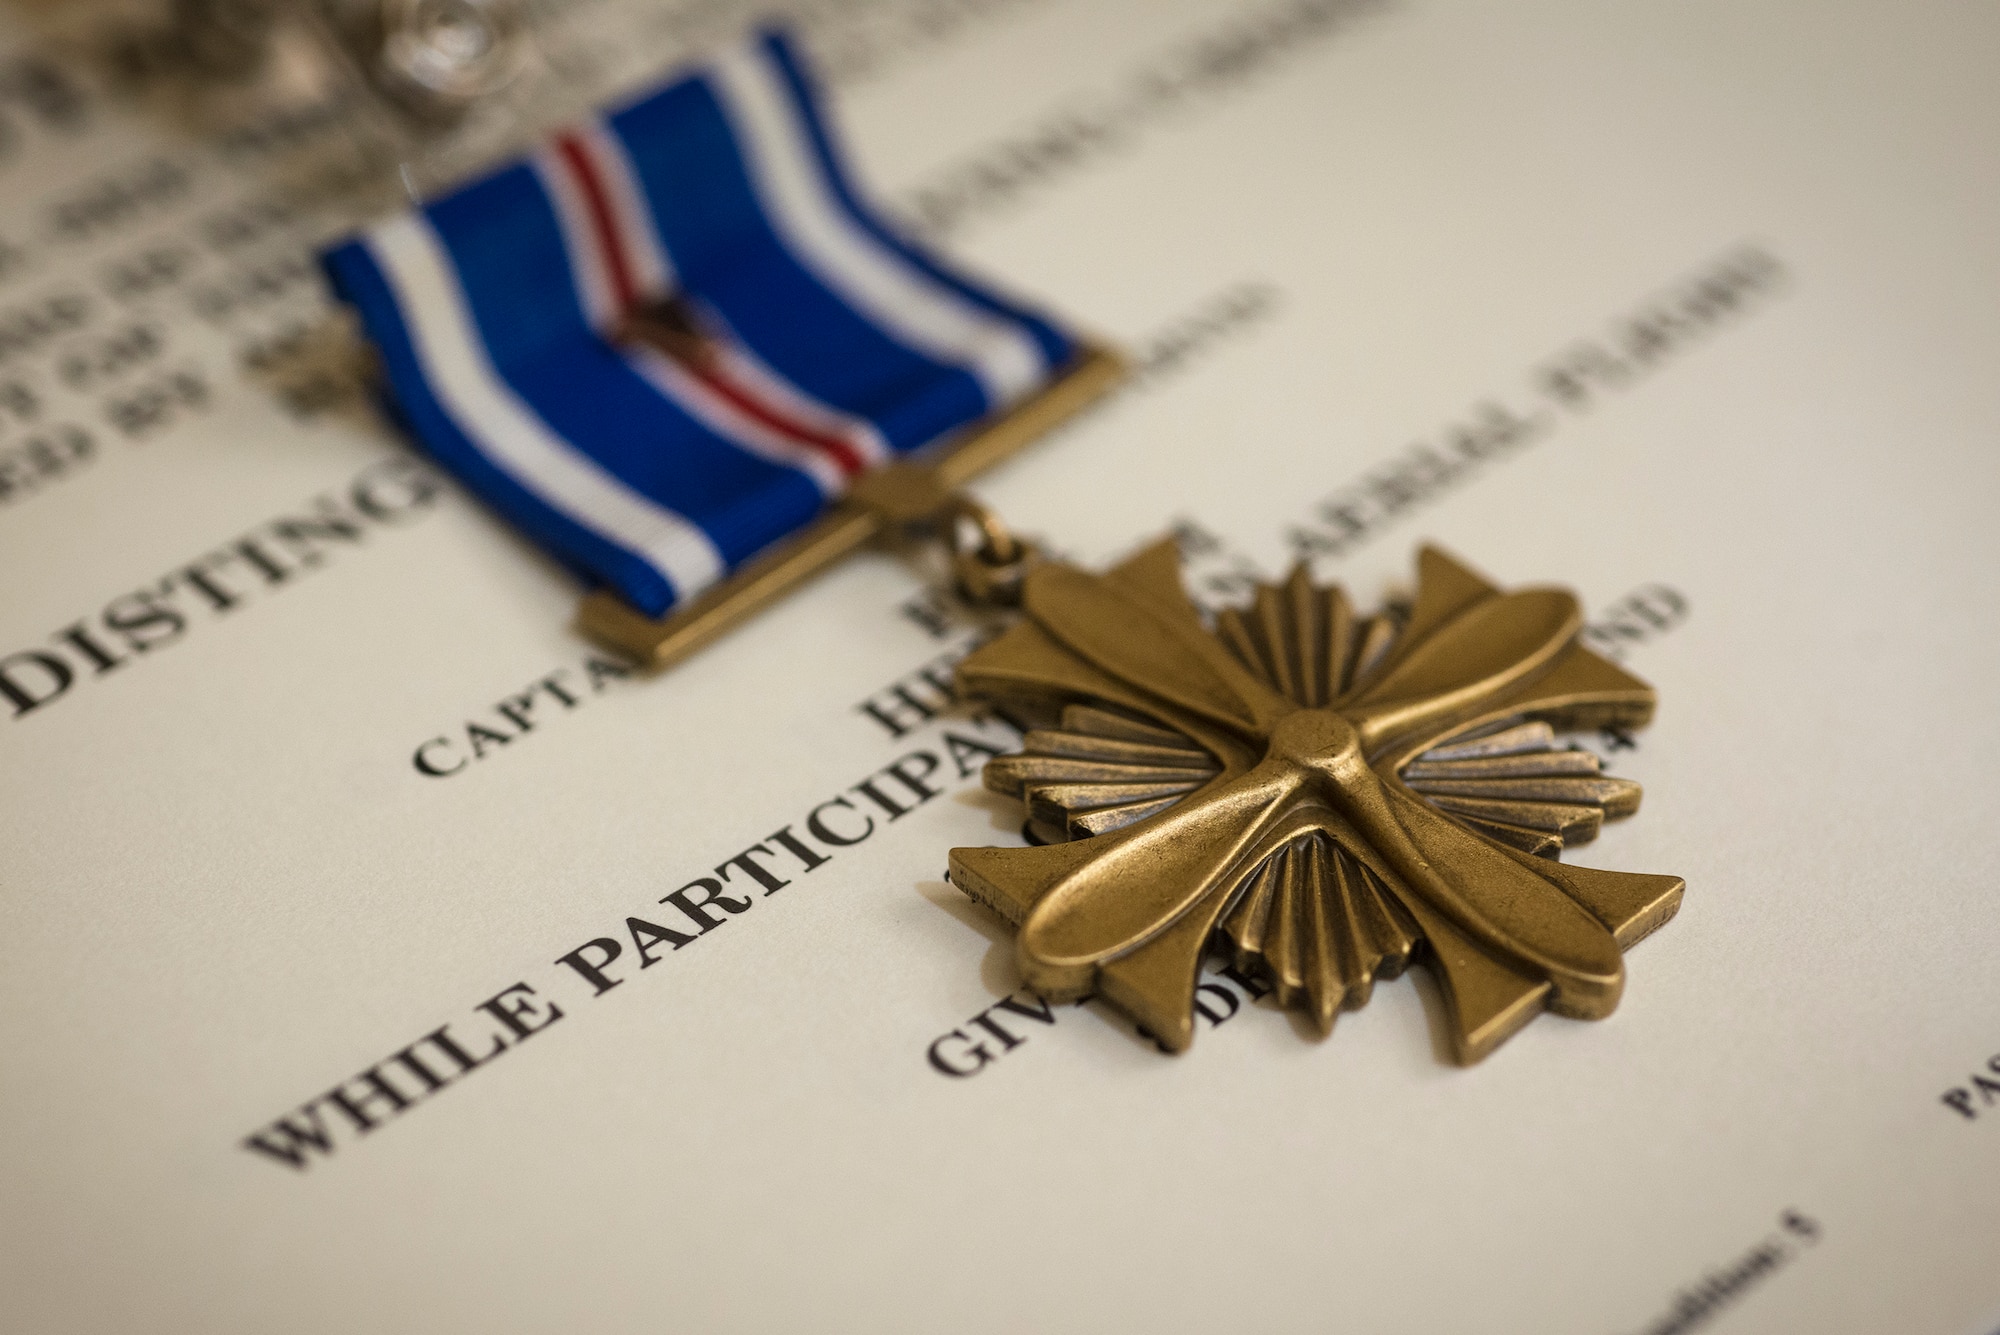 A Distinguished Flying Cross (DFC) sits on display prior to being awarded to U.S. Air Force Maj. Jeremiah Parvin, 75th Fighter Squadron A-10 C Thunderbolt II pilot, Jan. 29, 2015, at Moody Air Force Base, Ga. The DFC is awarded for heroism or extraordinary achievement while participating in an aerial flight. (U.S. Air Force photo by Senior Airman Ryan Callaghan/Released)